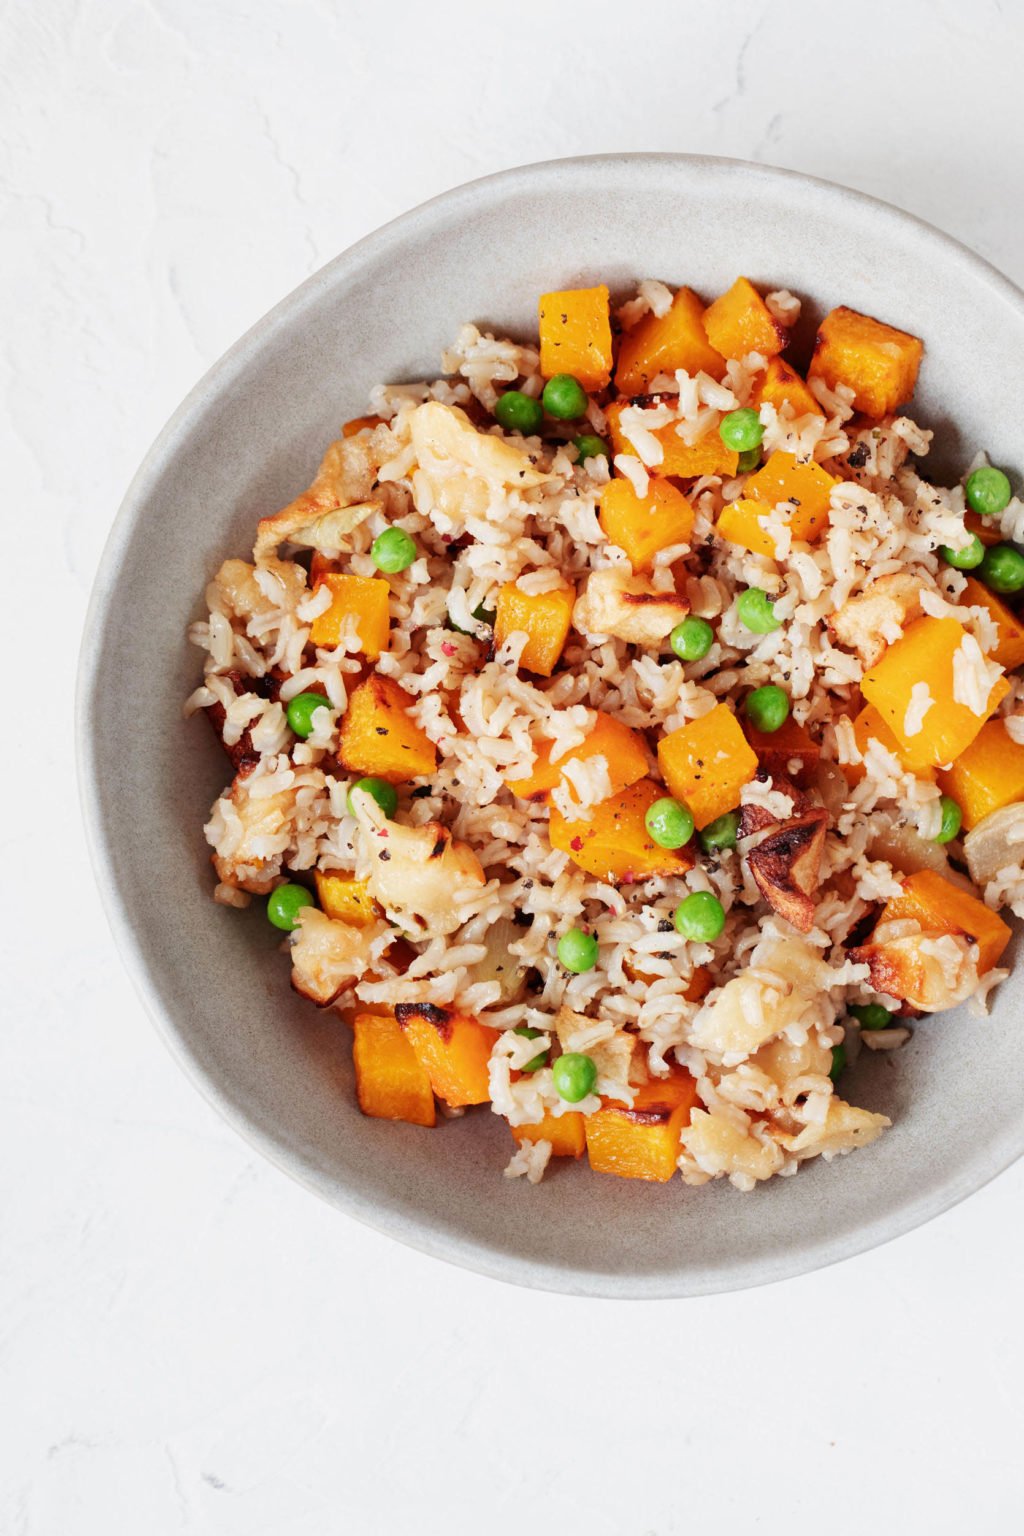 An overhead image of a round bowl of gingery butternut squash rice.